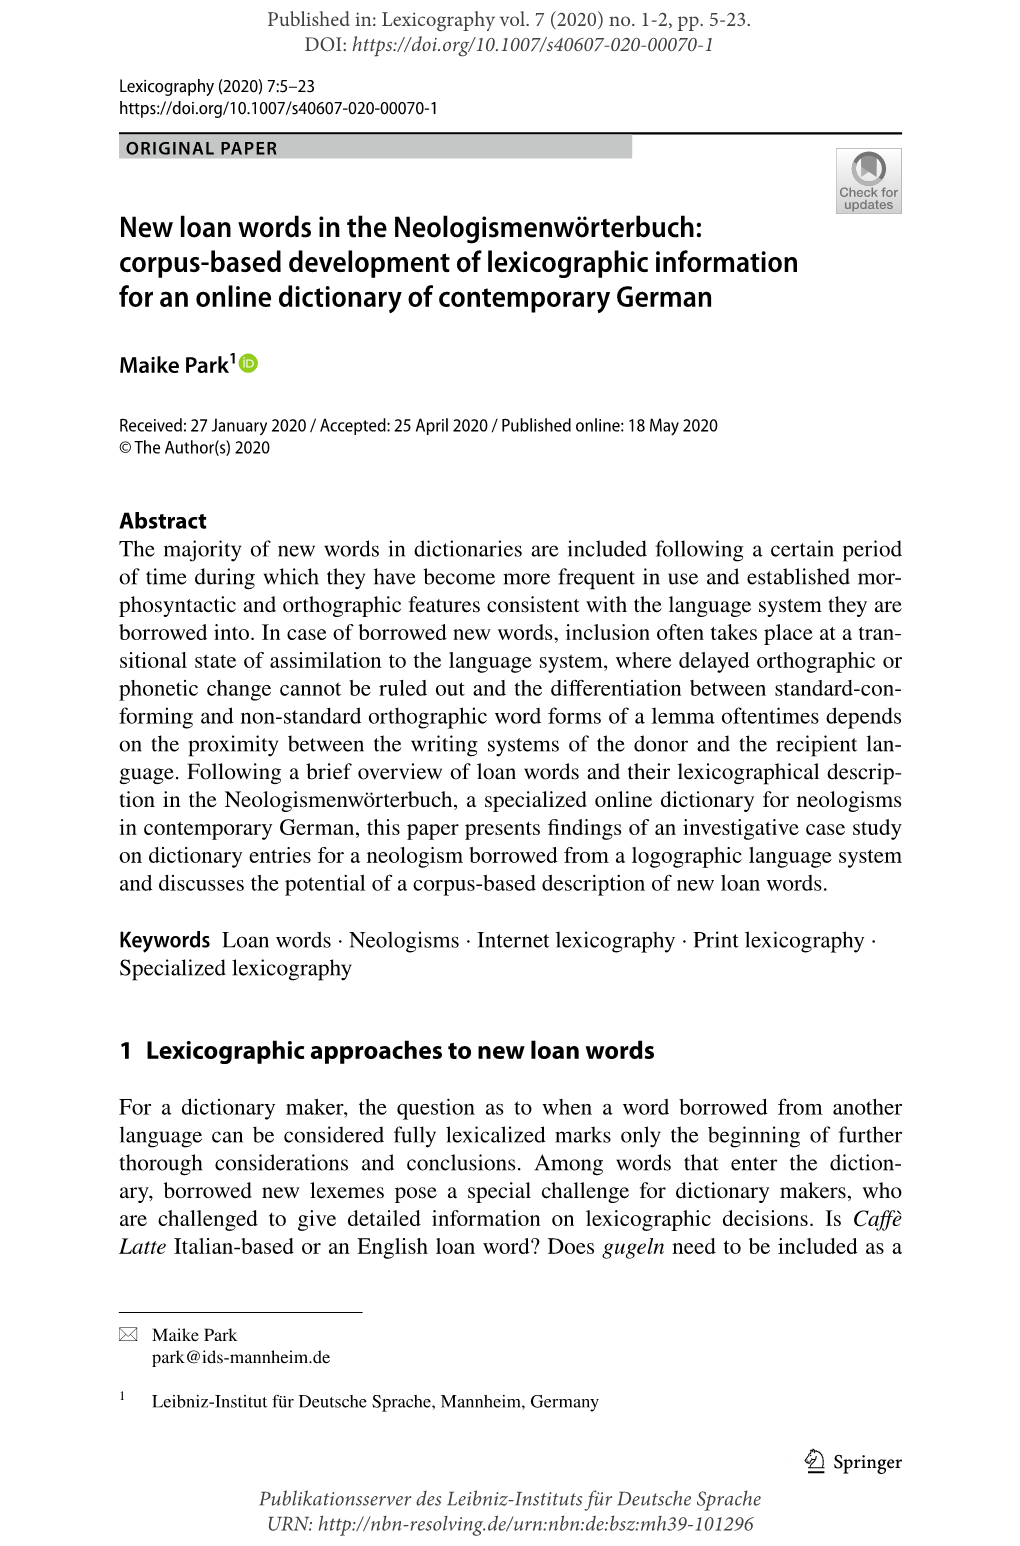 New Loan Words in the Neologismenwörterbuch: Corpus‑Based Development of Lexicographic Information for an Online Dictionary of Contemporary German